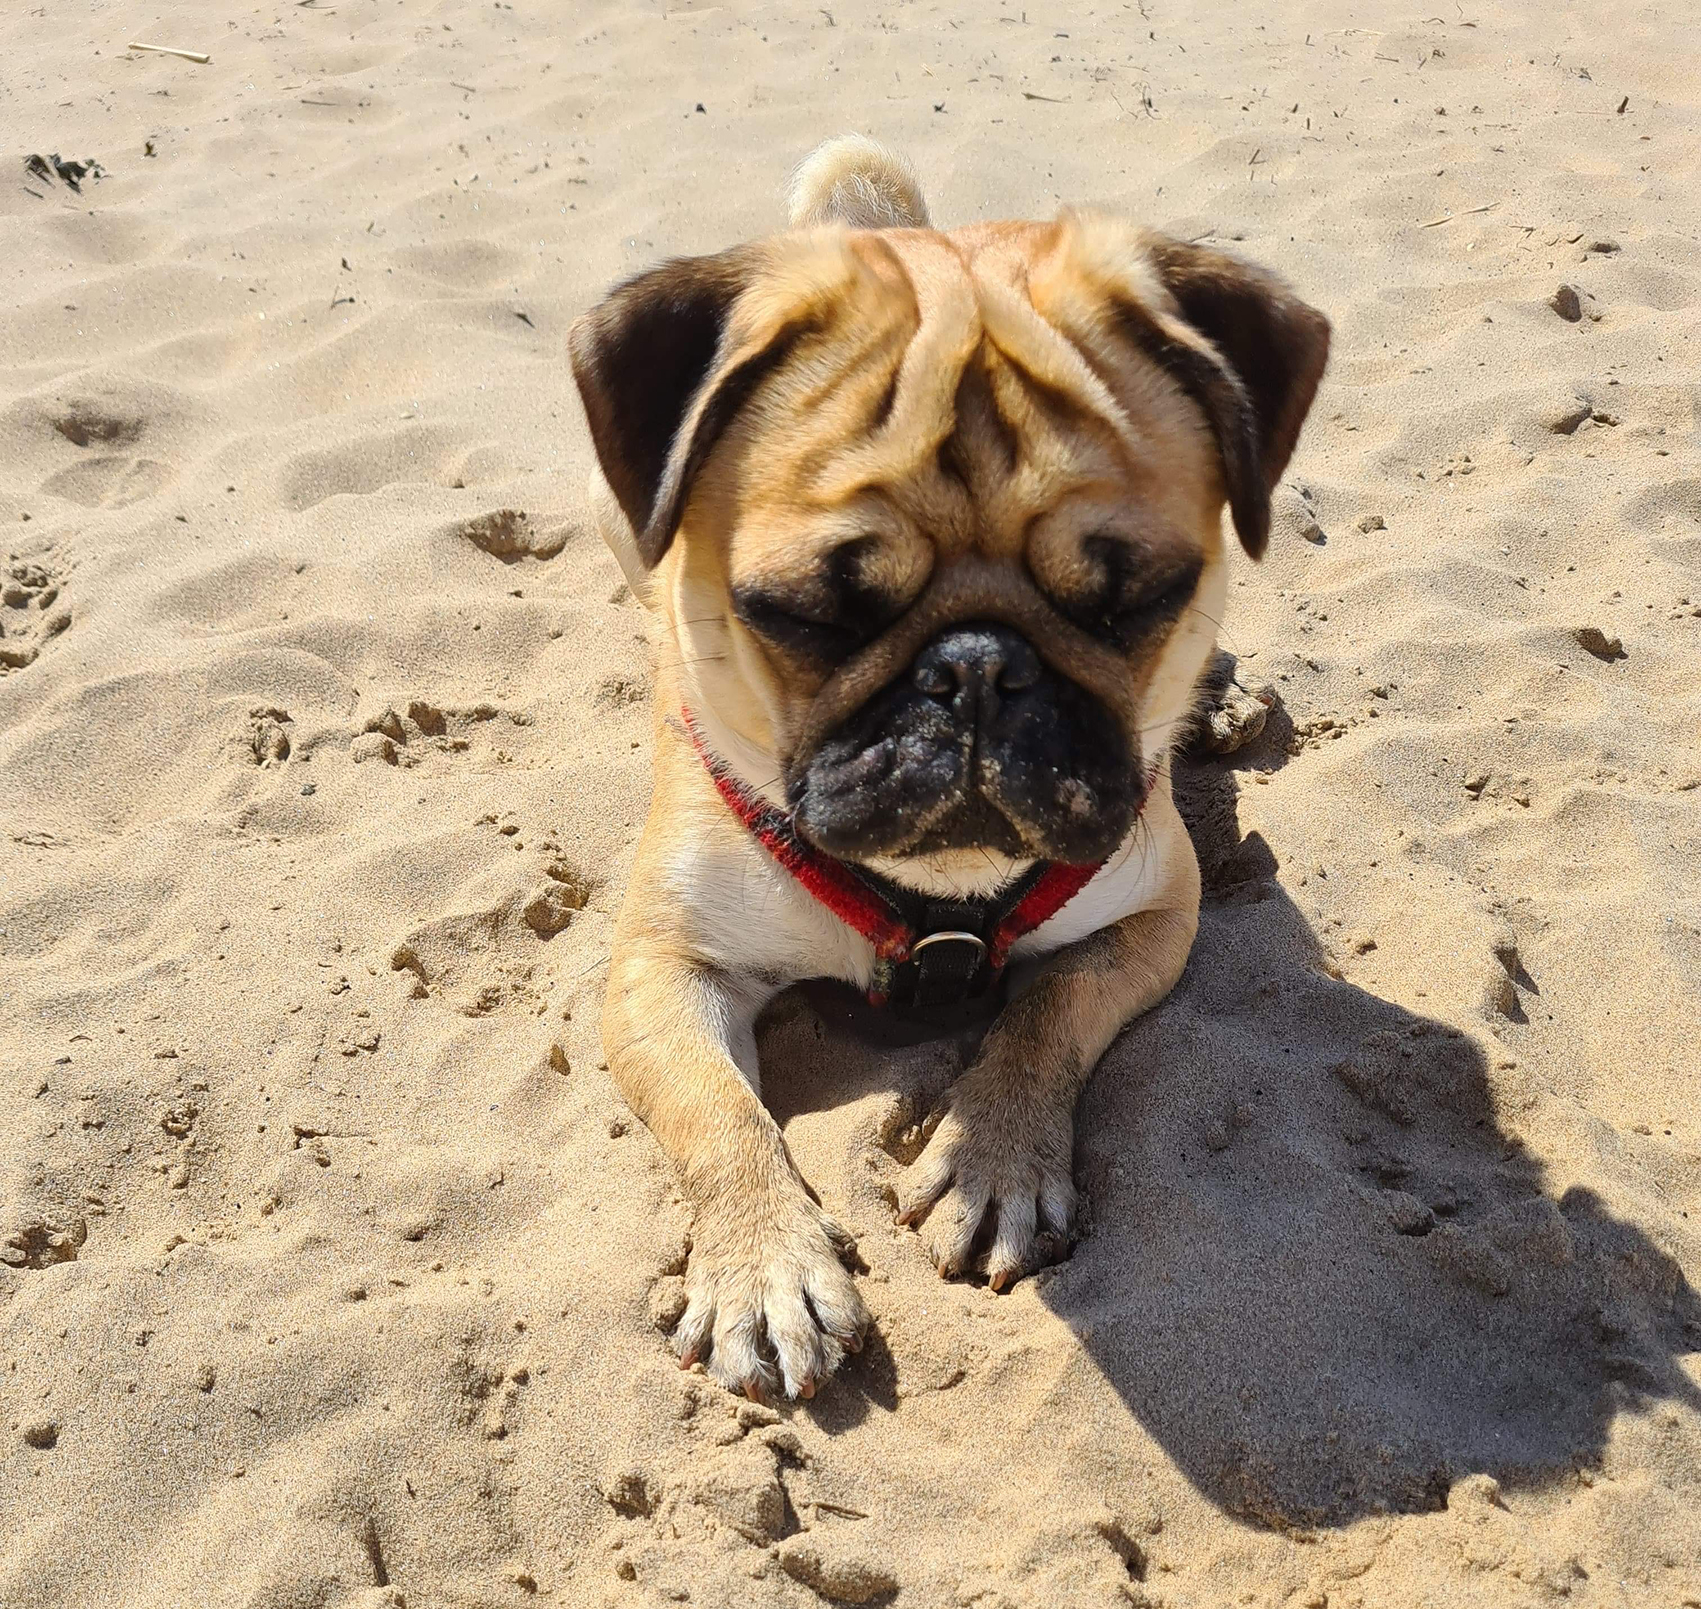 Adoption for Colin - image Beau on https://pugprotectiontrust.org